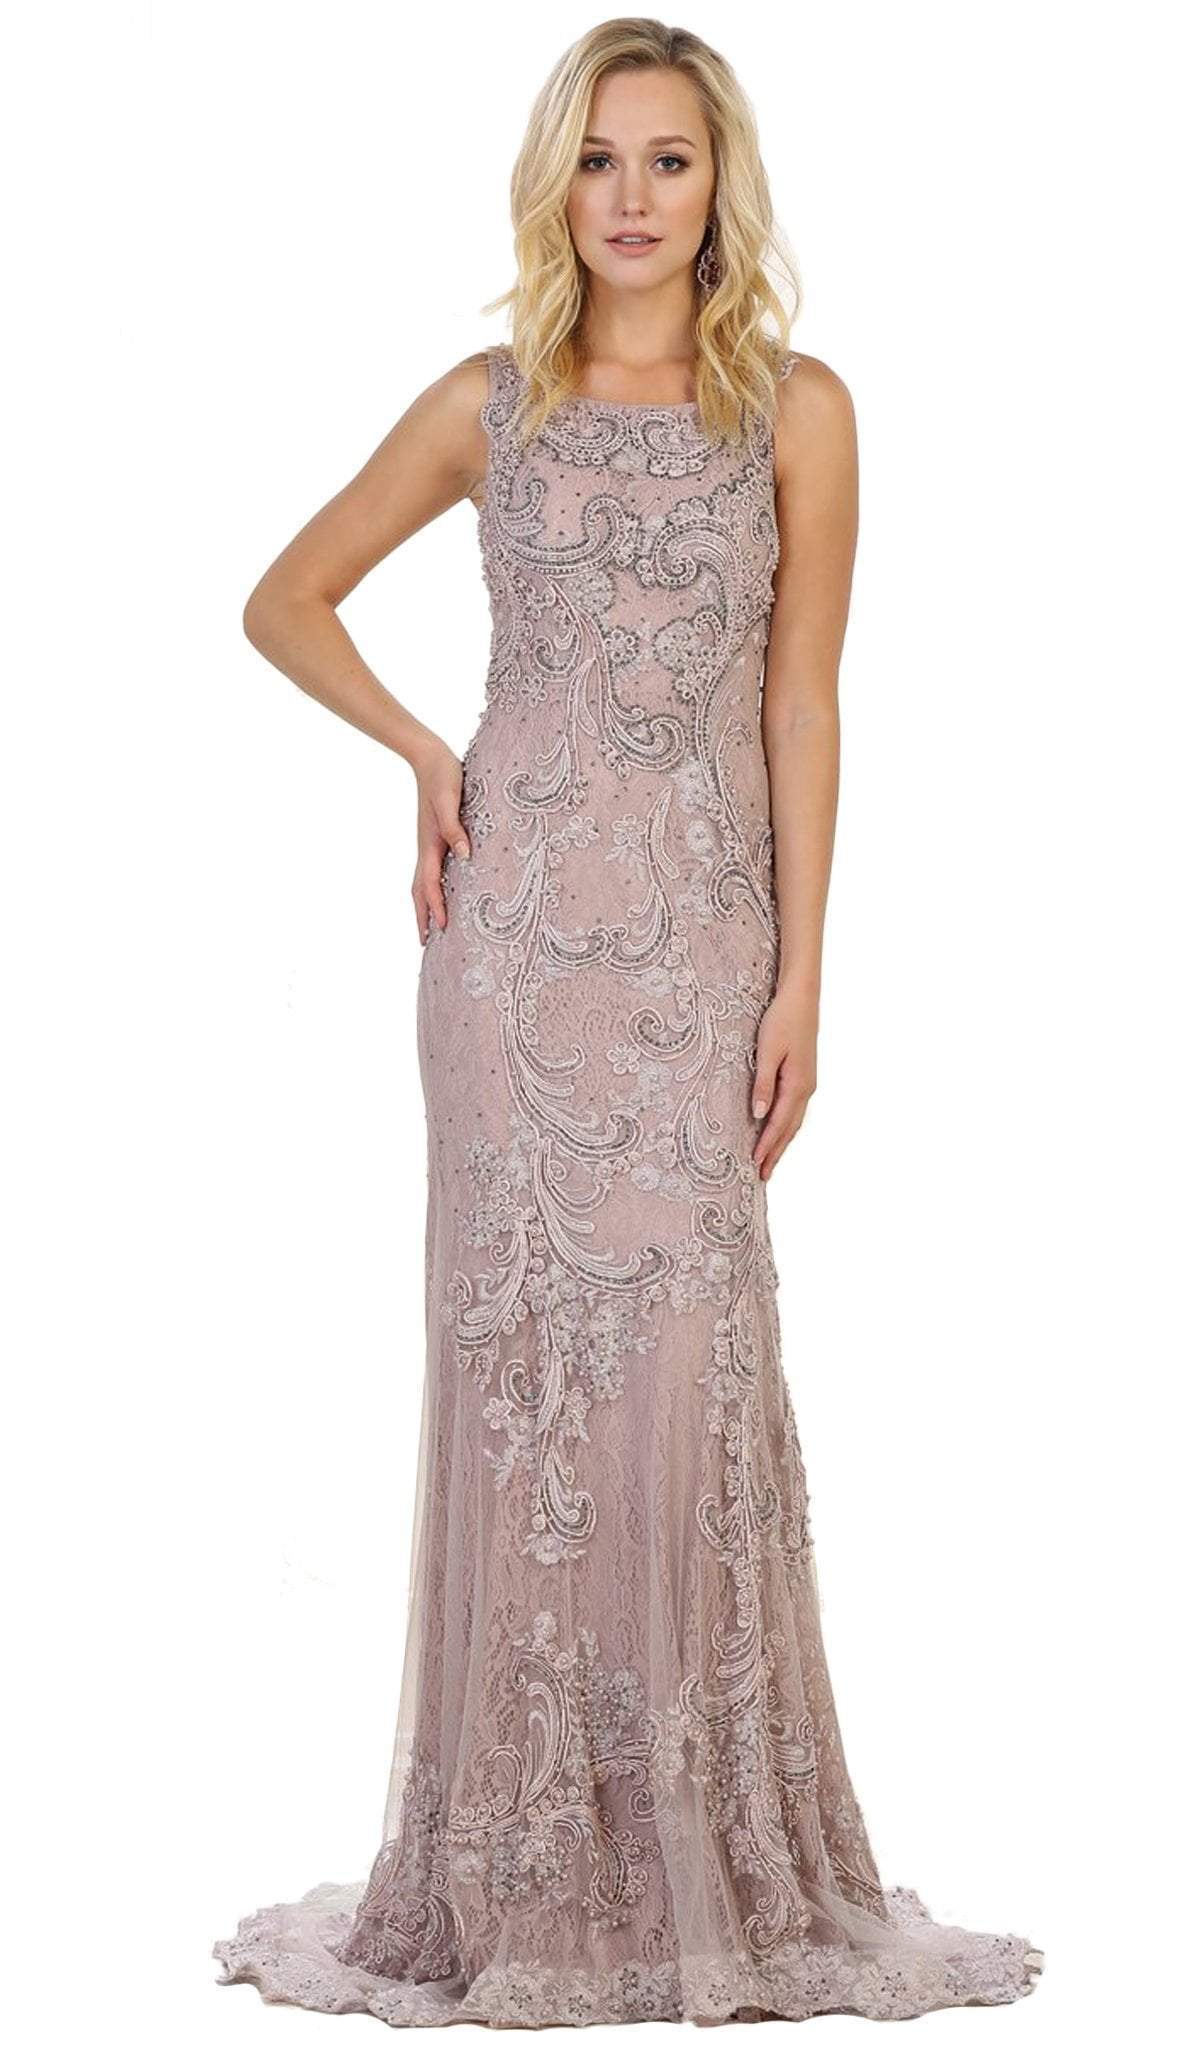 May Queen - RQ7555 Embellished Scoop Neck Sheath Evening Dress Special Occasion Dress 4 / Mauve